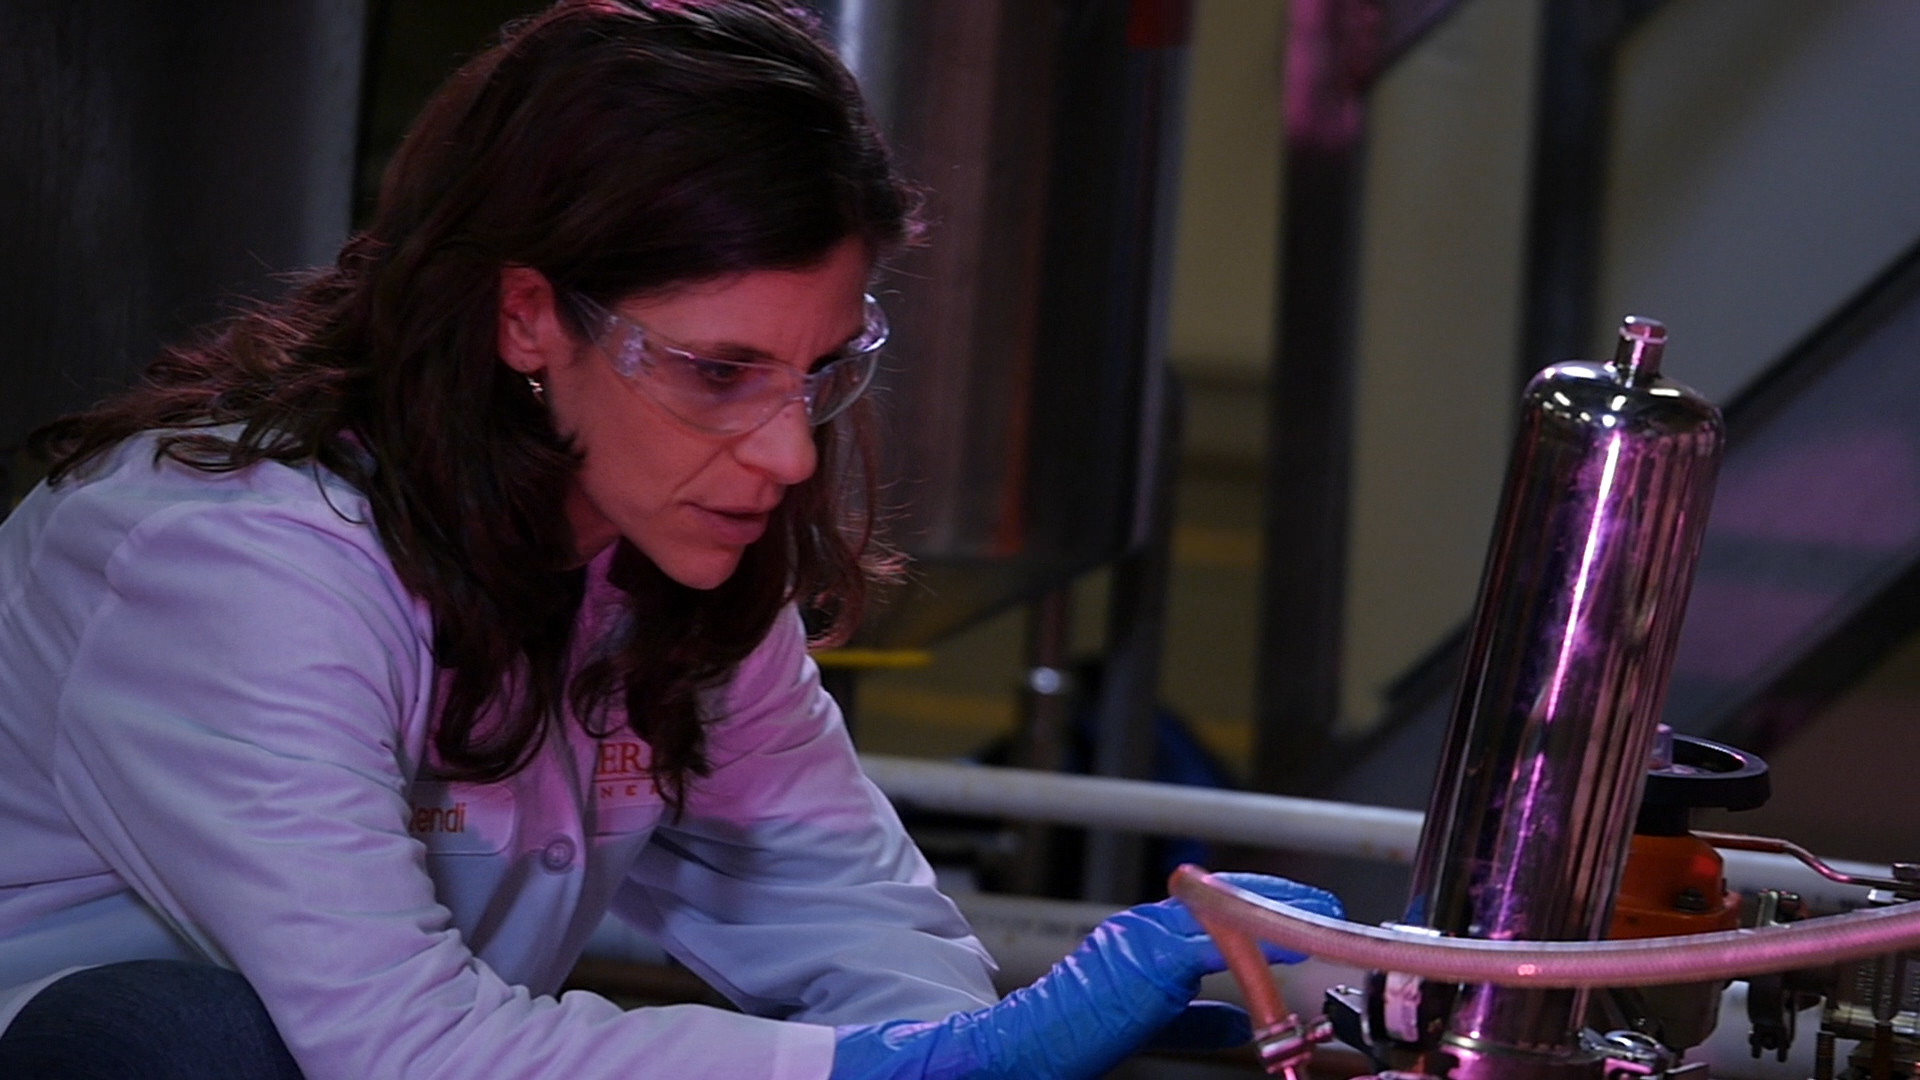 Cerion Scientist working with nanomaterials in the manufacturing plant.